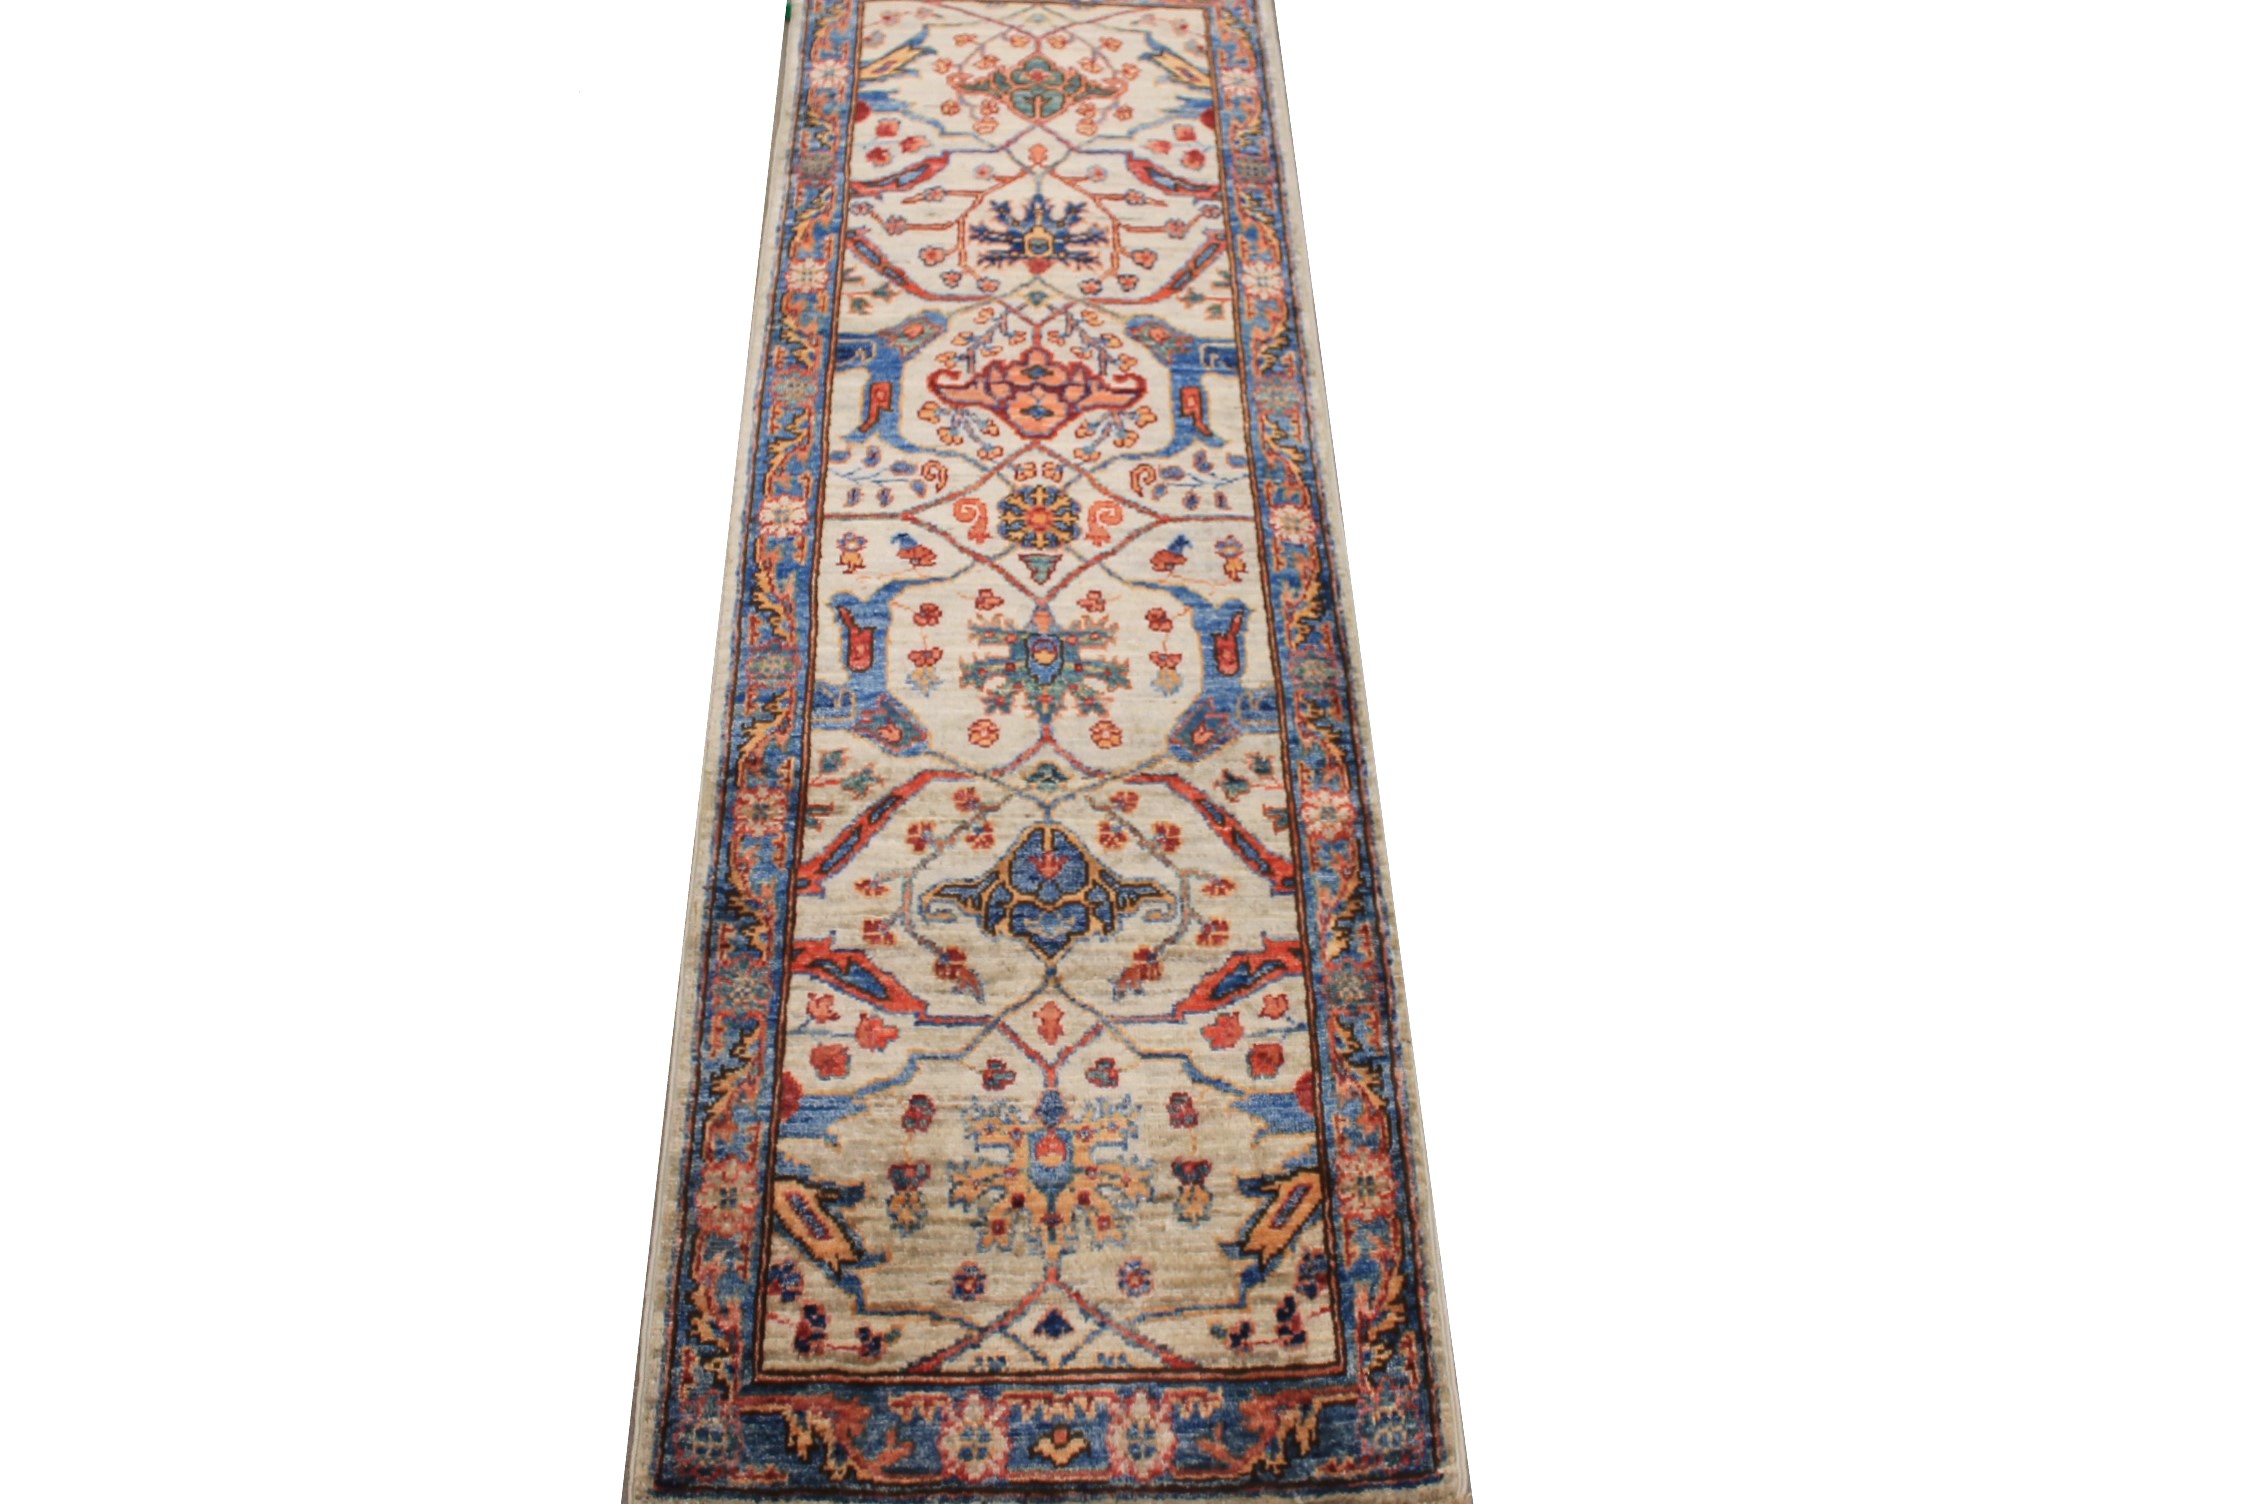 6 ft. Runner Aryana & Antique Revivals Hand Knotted Wool Area Rug - MR026050